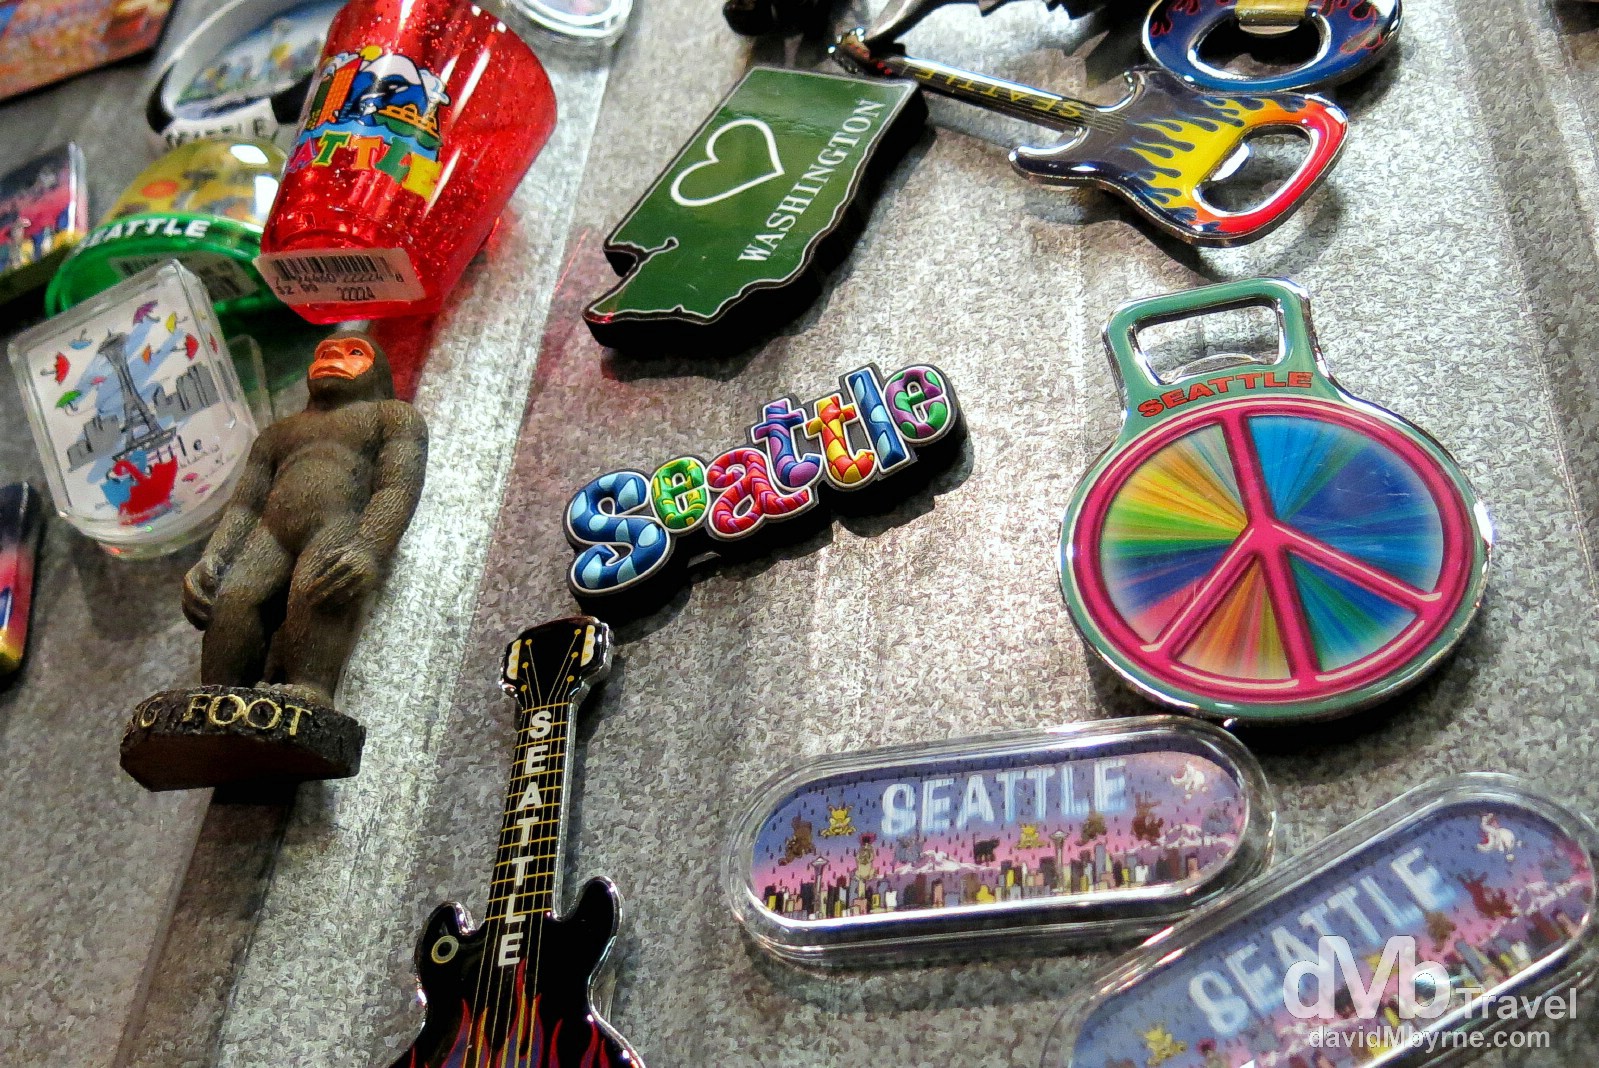 Fridge magnets in Ye Olde Curiosity Shop, Seattle. Ye Olde Curiosity Shop has been here in one form or another since 1899, in continuous operation by the same family. The narrow, cluttered gift novelty store -- a mainstay of Seattle tourism -- never fails to please and revolt. Although a shop first & foremost, the resident (American, not Egyptian) mummies, Sylvester and Sylvia, are its biggest draw. Other Shop denizens include a virtual family of Barnum Mer-creatures: a Mermaid, a Mer-Baby, and a Mer-dog named "Petri-Fido." The requisite freak pig in a jar shares space with a ship scale model constructed entirely of matchsticks. There is a 350-year-old "African voodoo monkey" -- its intestines have been removed and braided onto its head. Curious indeed and a Seattle must-see. Ye Olde Curiosity Shop, Seattle, Washington, USA. March 26th 2103. 